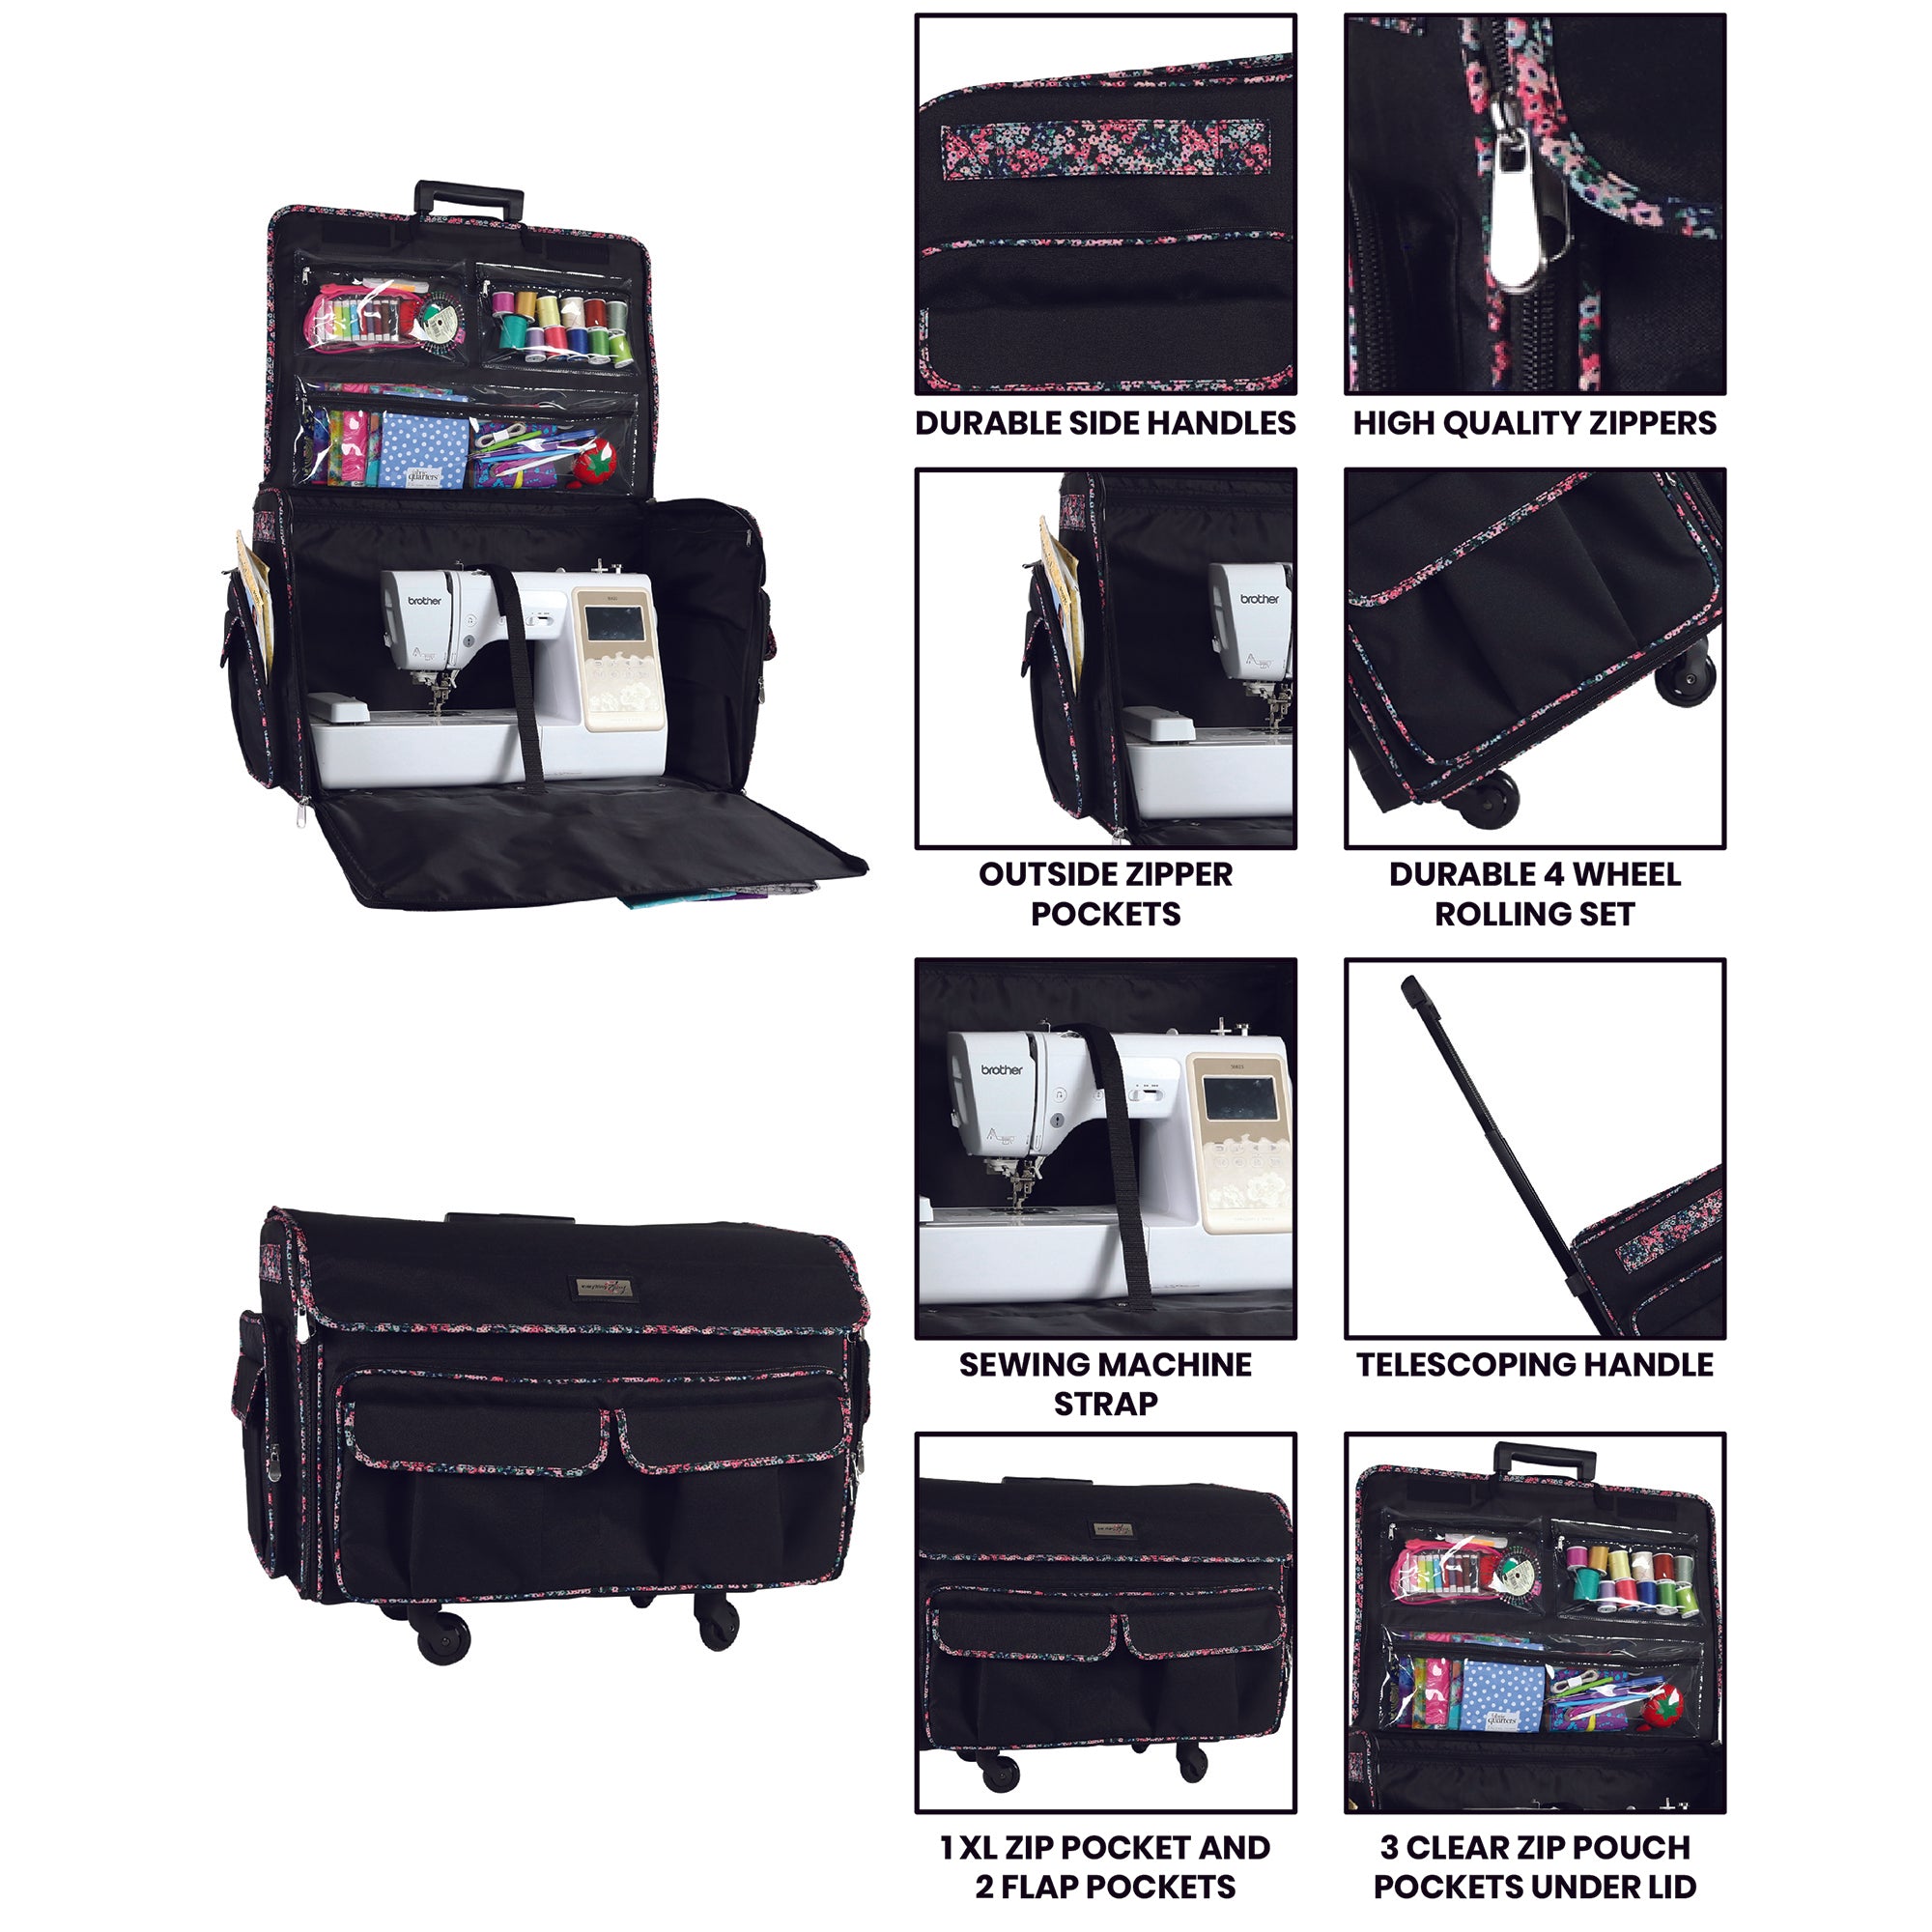 Everything Mary Collapsible Serger Machine Rolling Storage Case, Black Floral - Carrying Bag for Overlock Machines - for